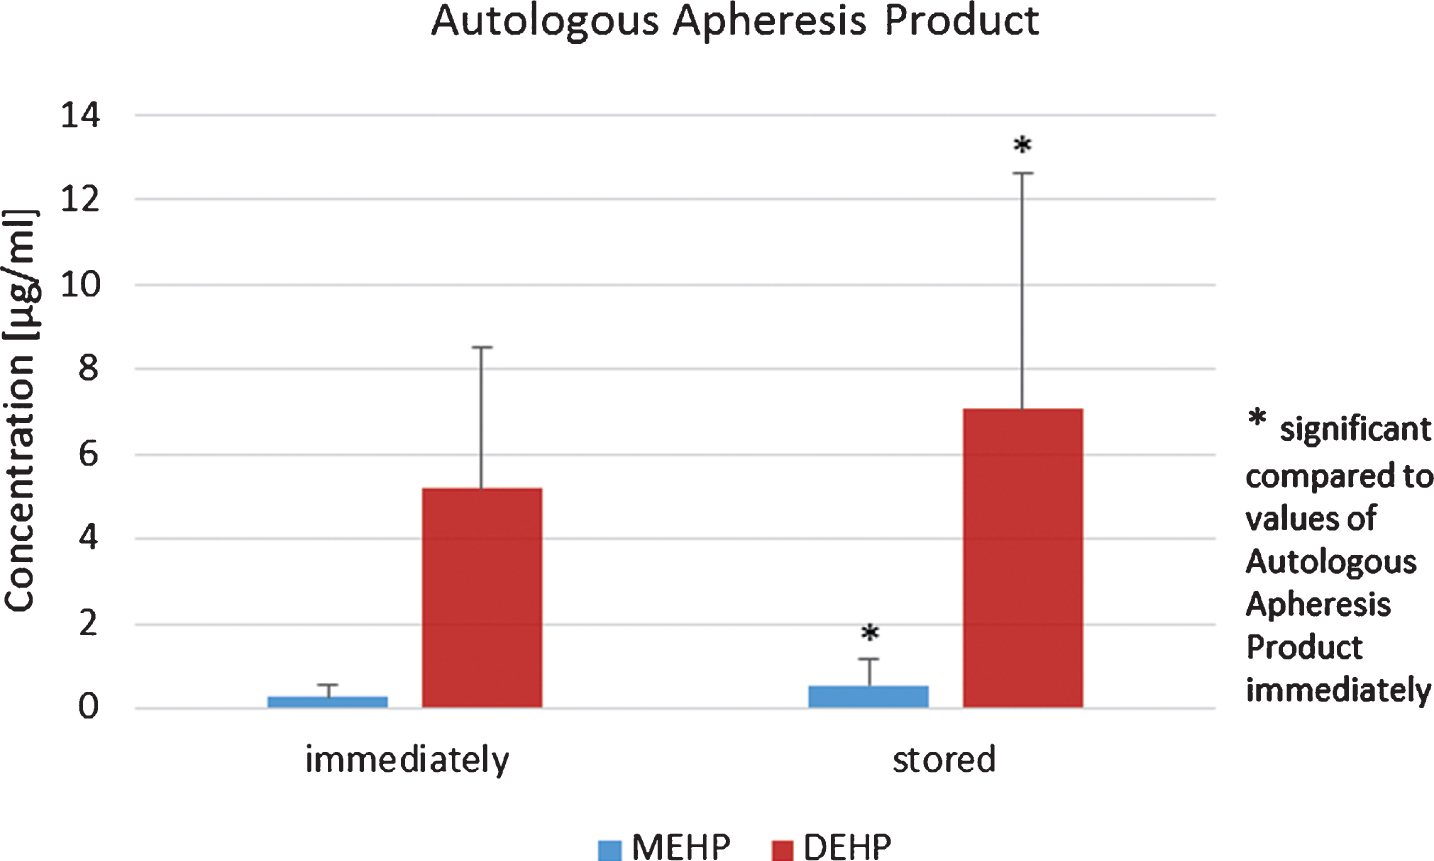 DEHP and MEHP concentrations in autologous apheresis products before and after 47 days storage at –175°C.